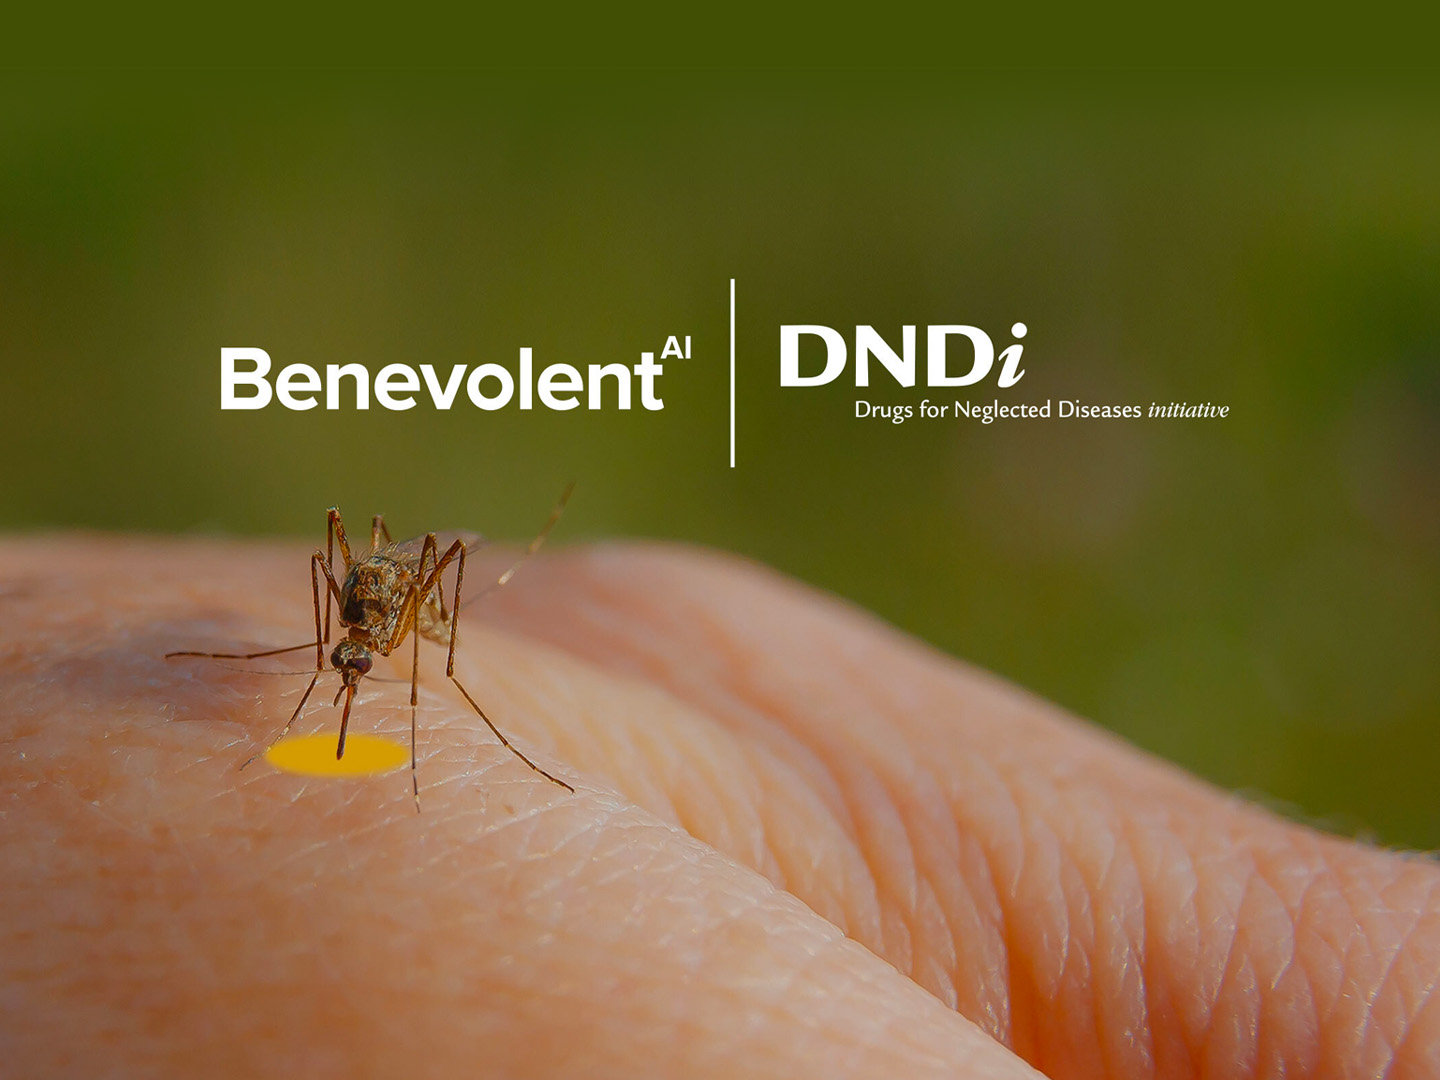 DNDi_and_BenevolentAI_collaborate_to_accelerate_life-saving_drug_discovery_research_in_dengue.jpg